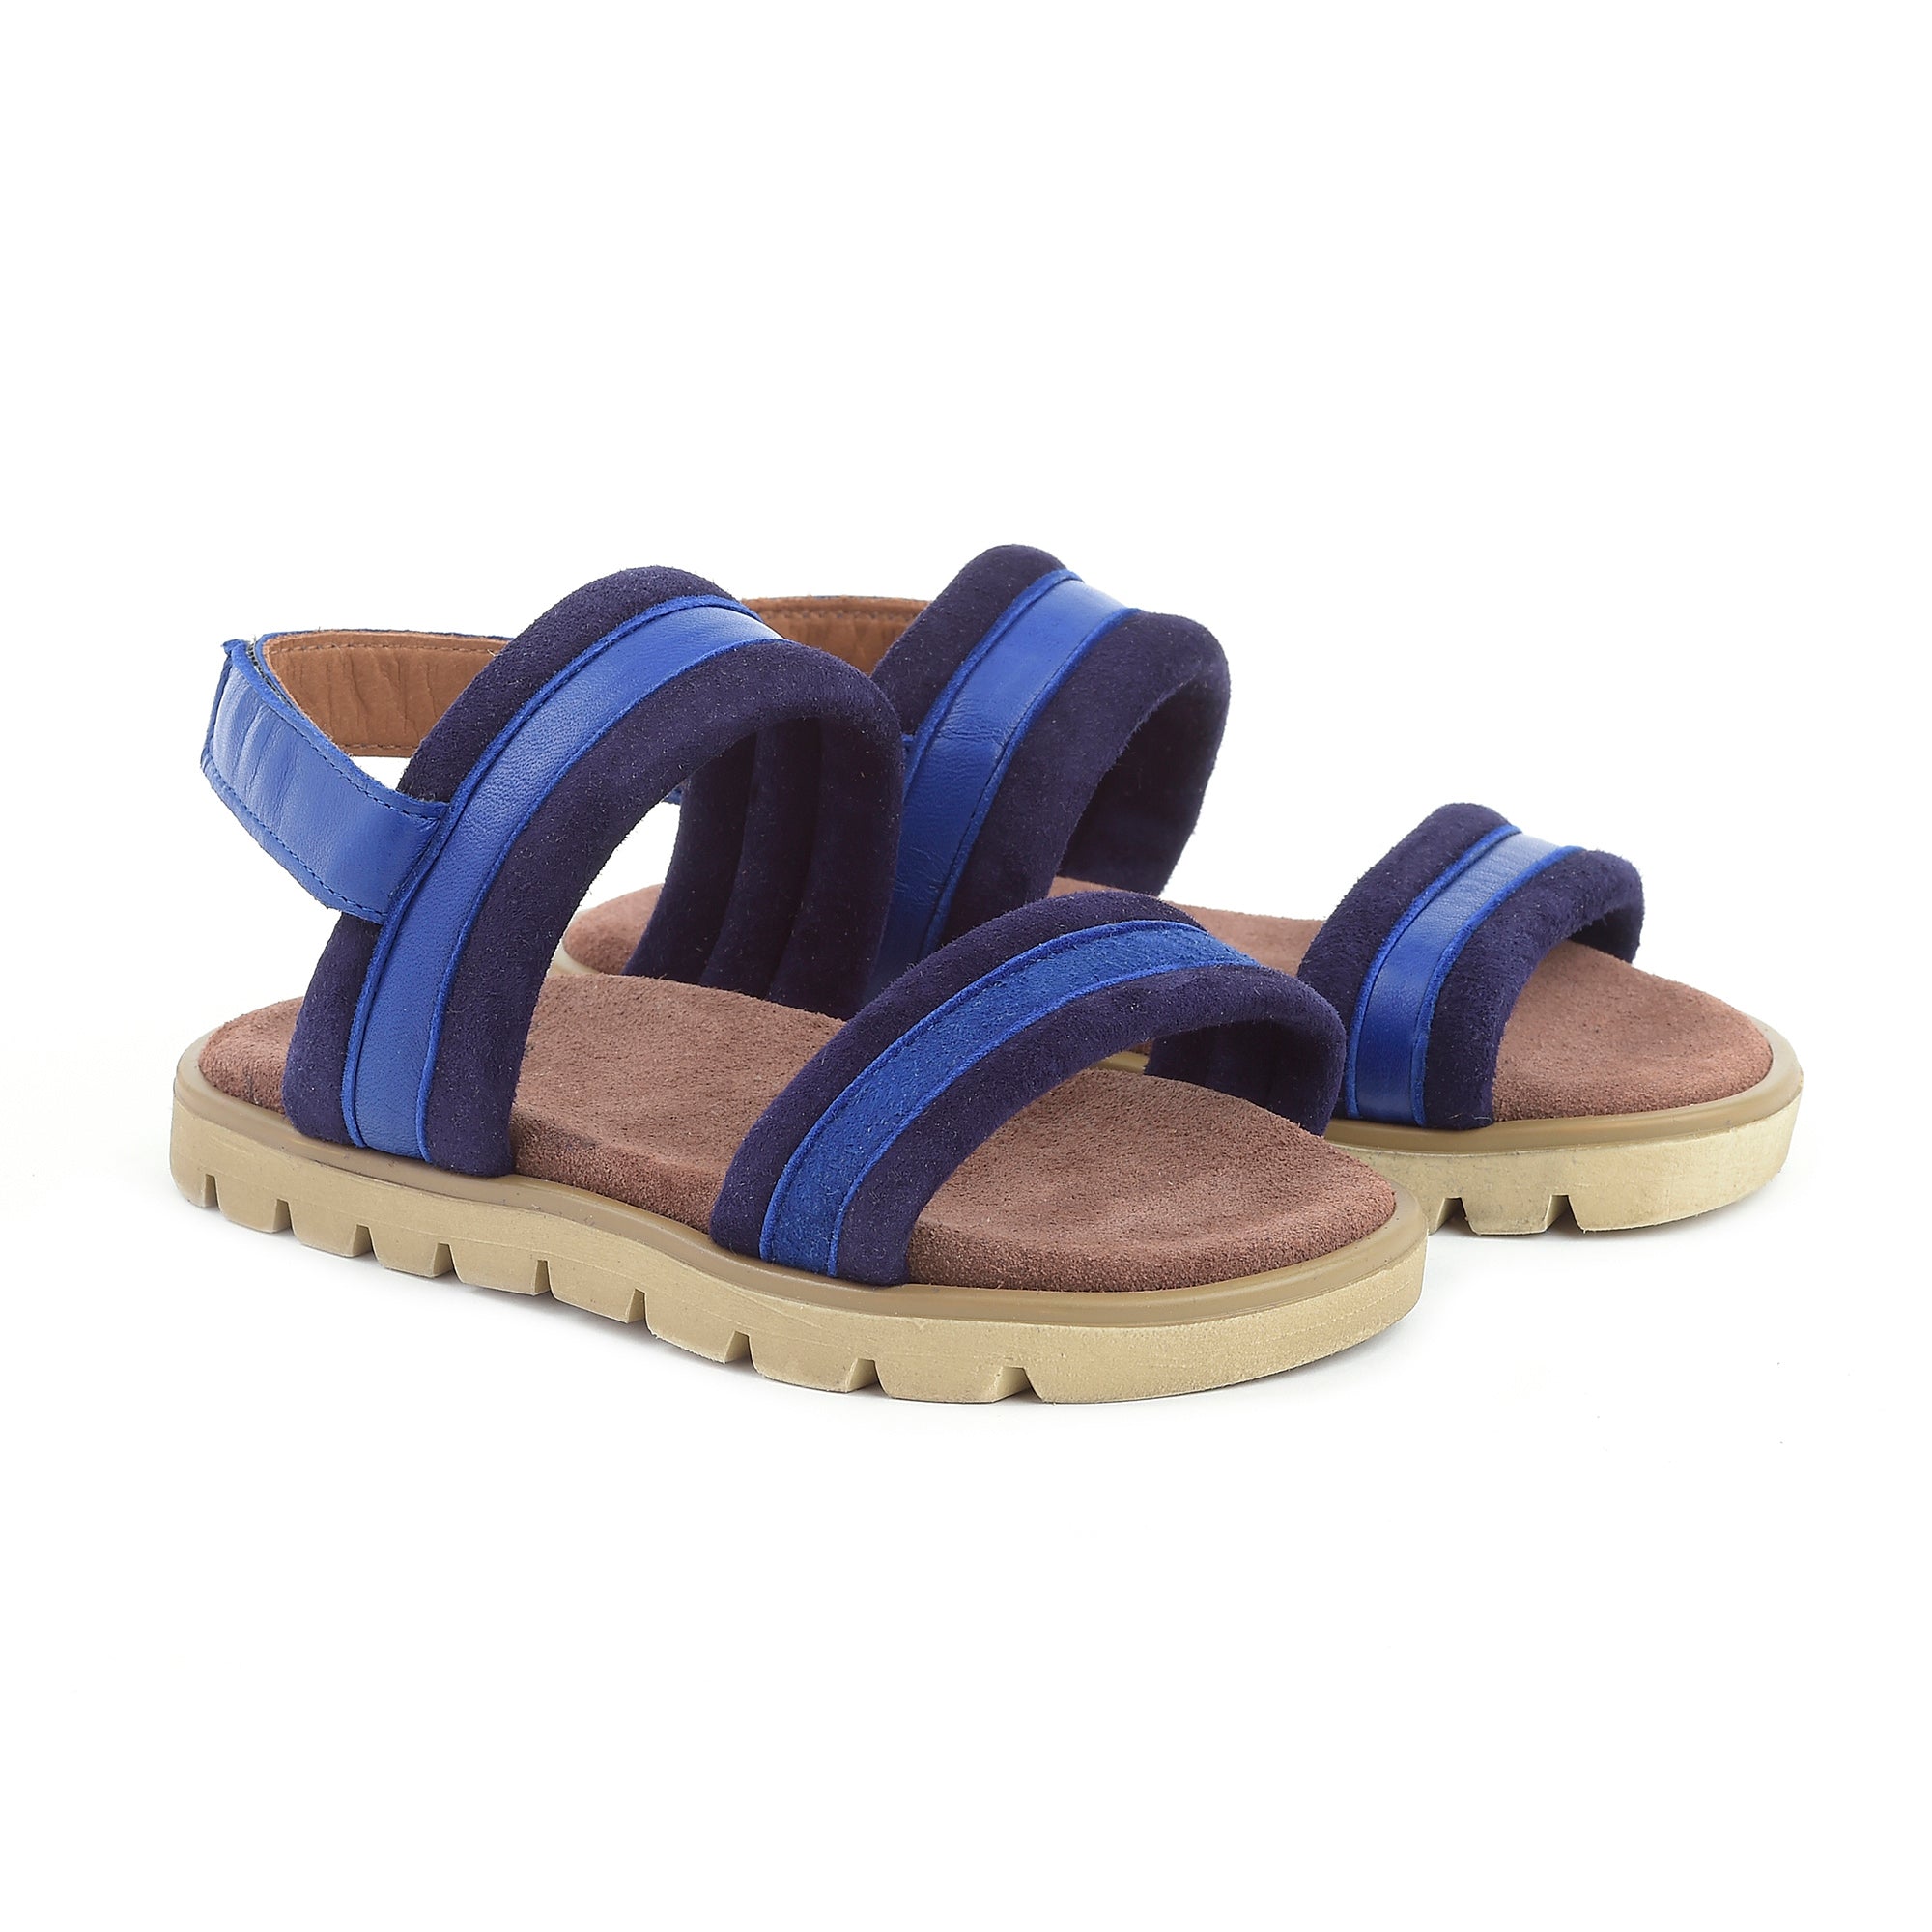 Girls Blue Leather Sandals